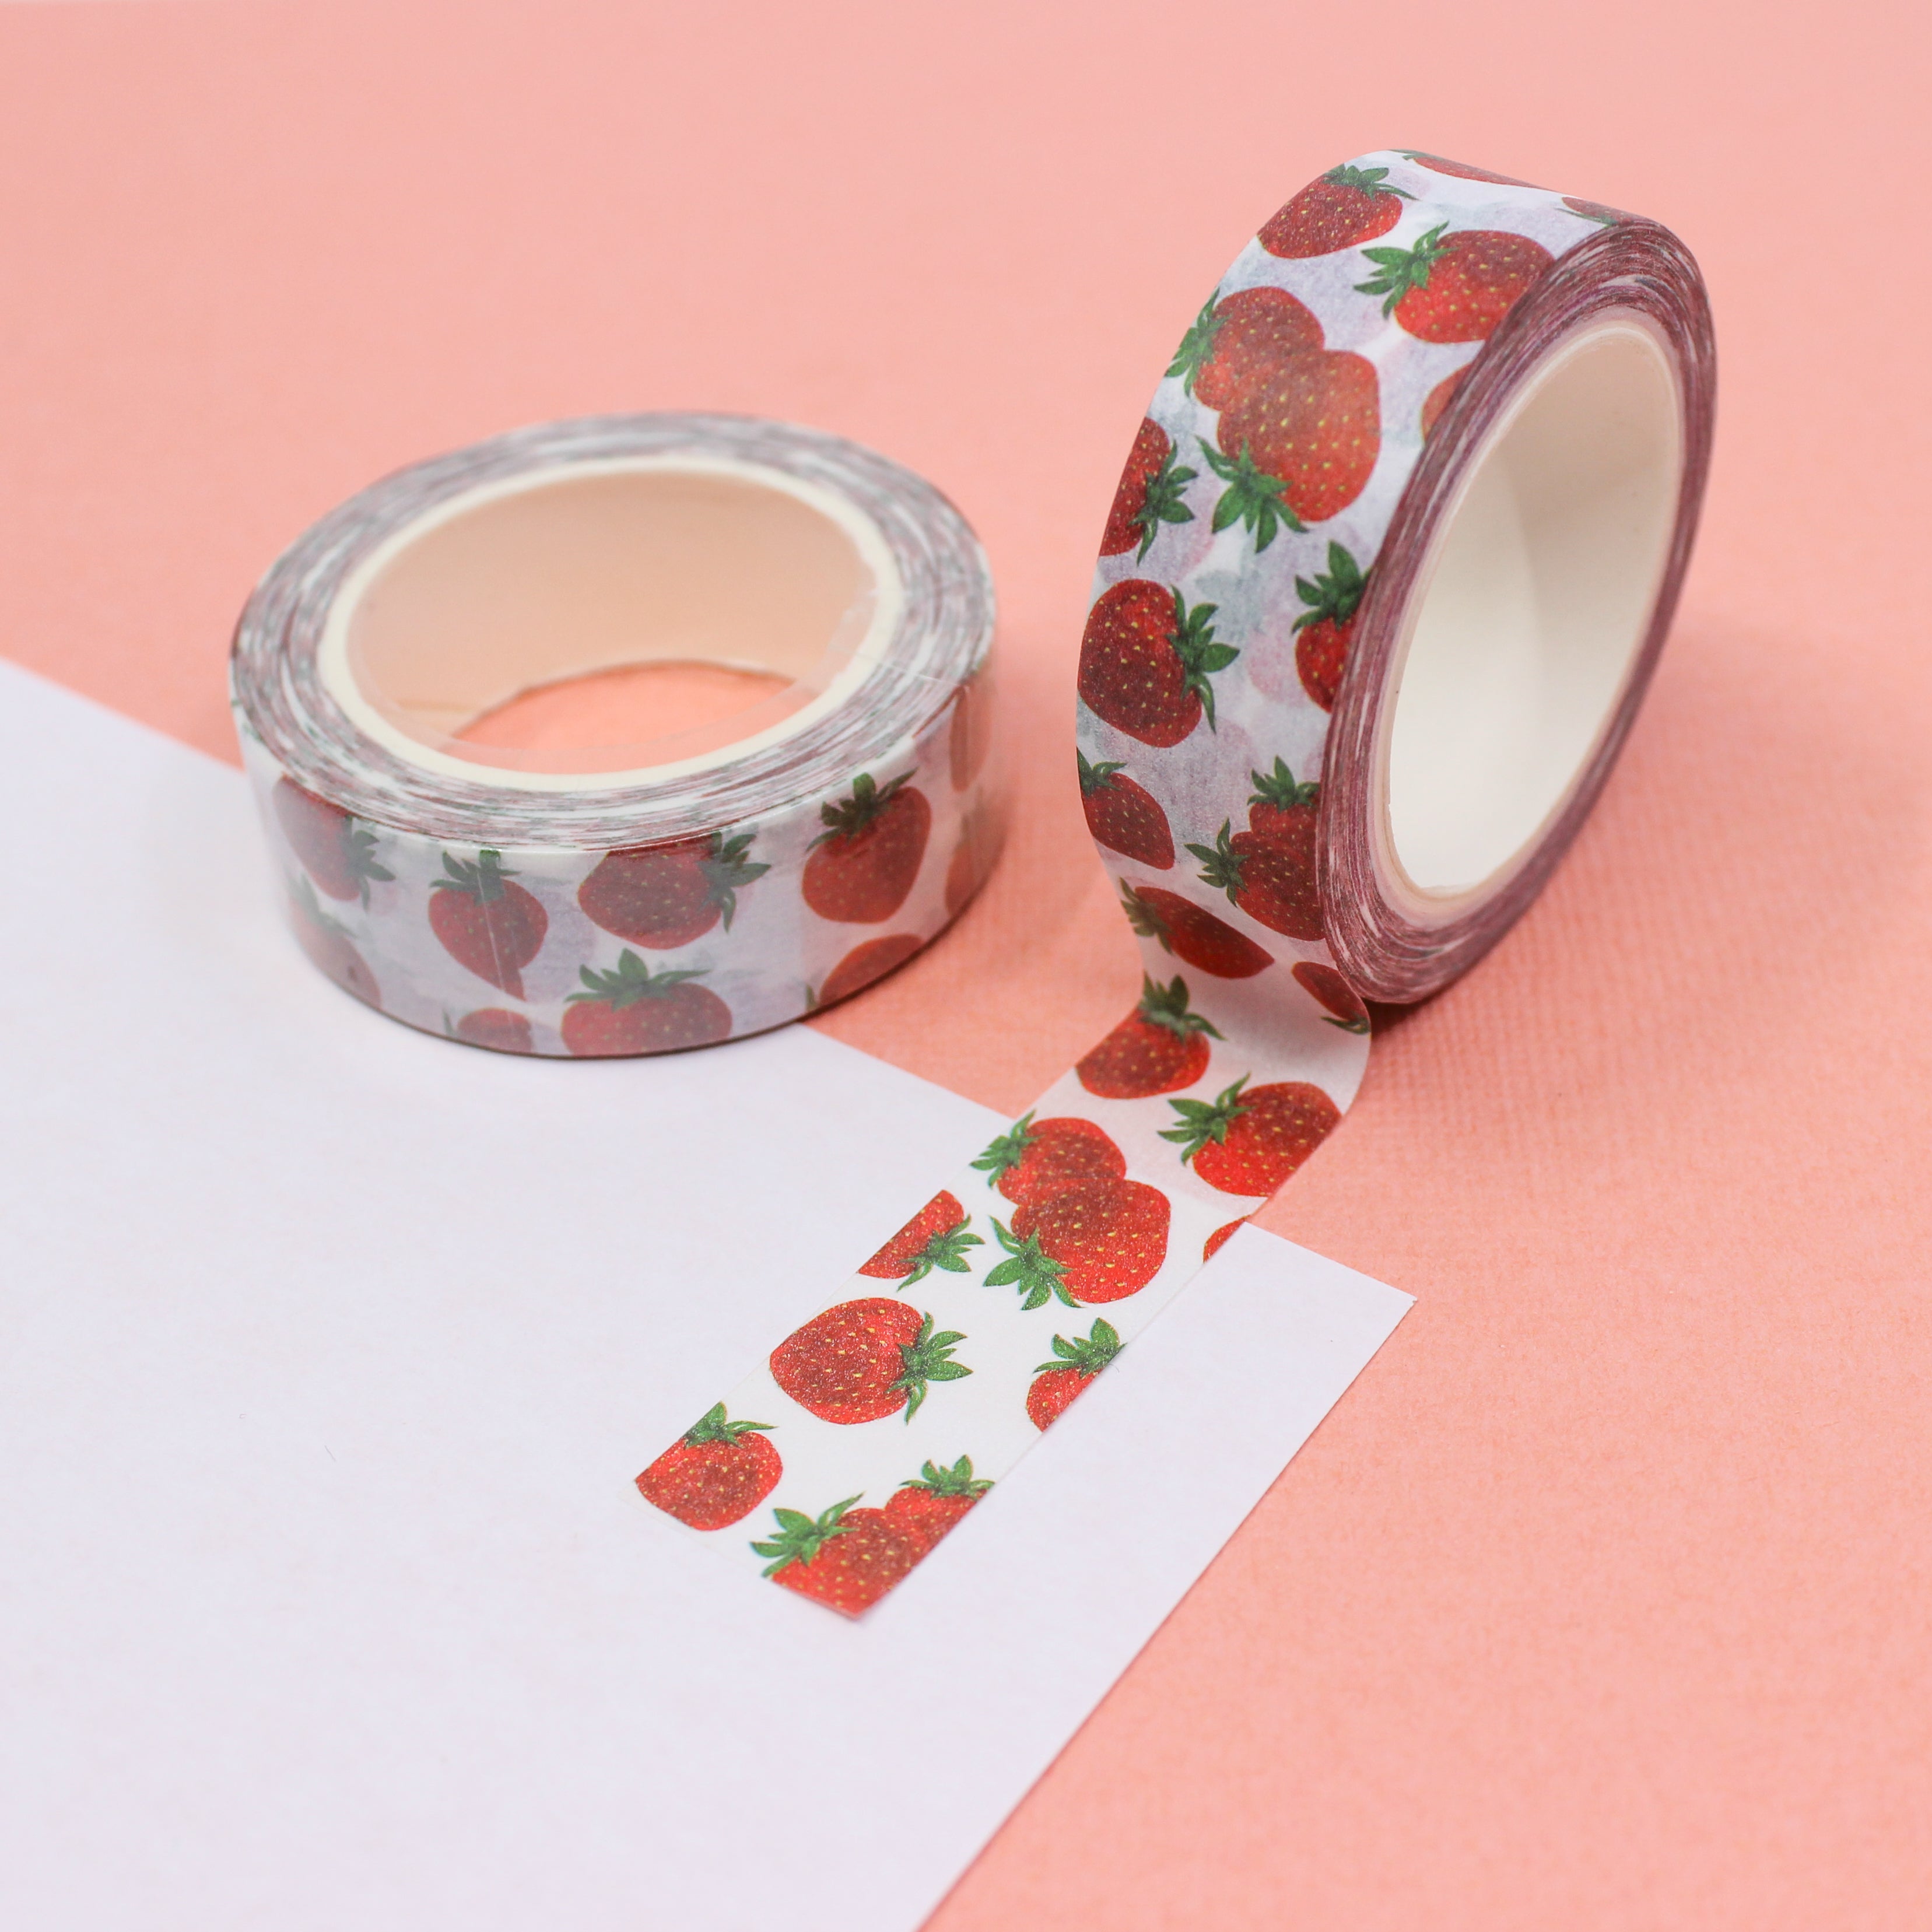 This is a strawberry tropical fruit collections pattern washi tape from BBB Supplies Craft Shop